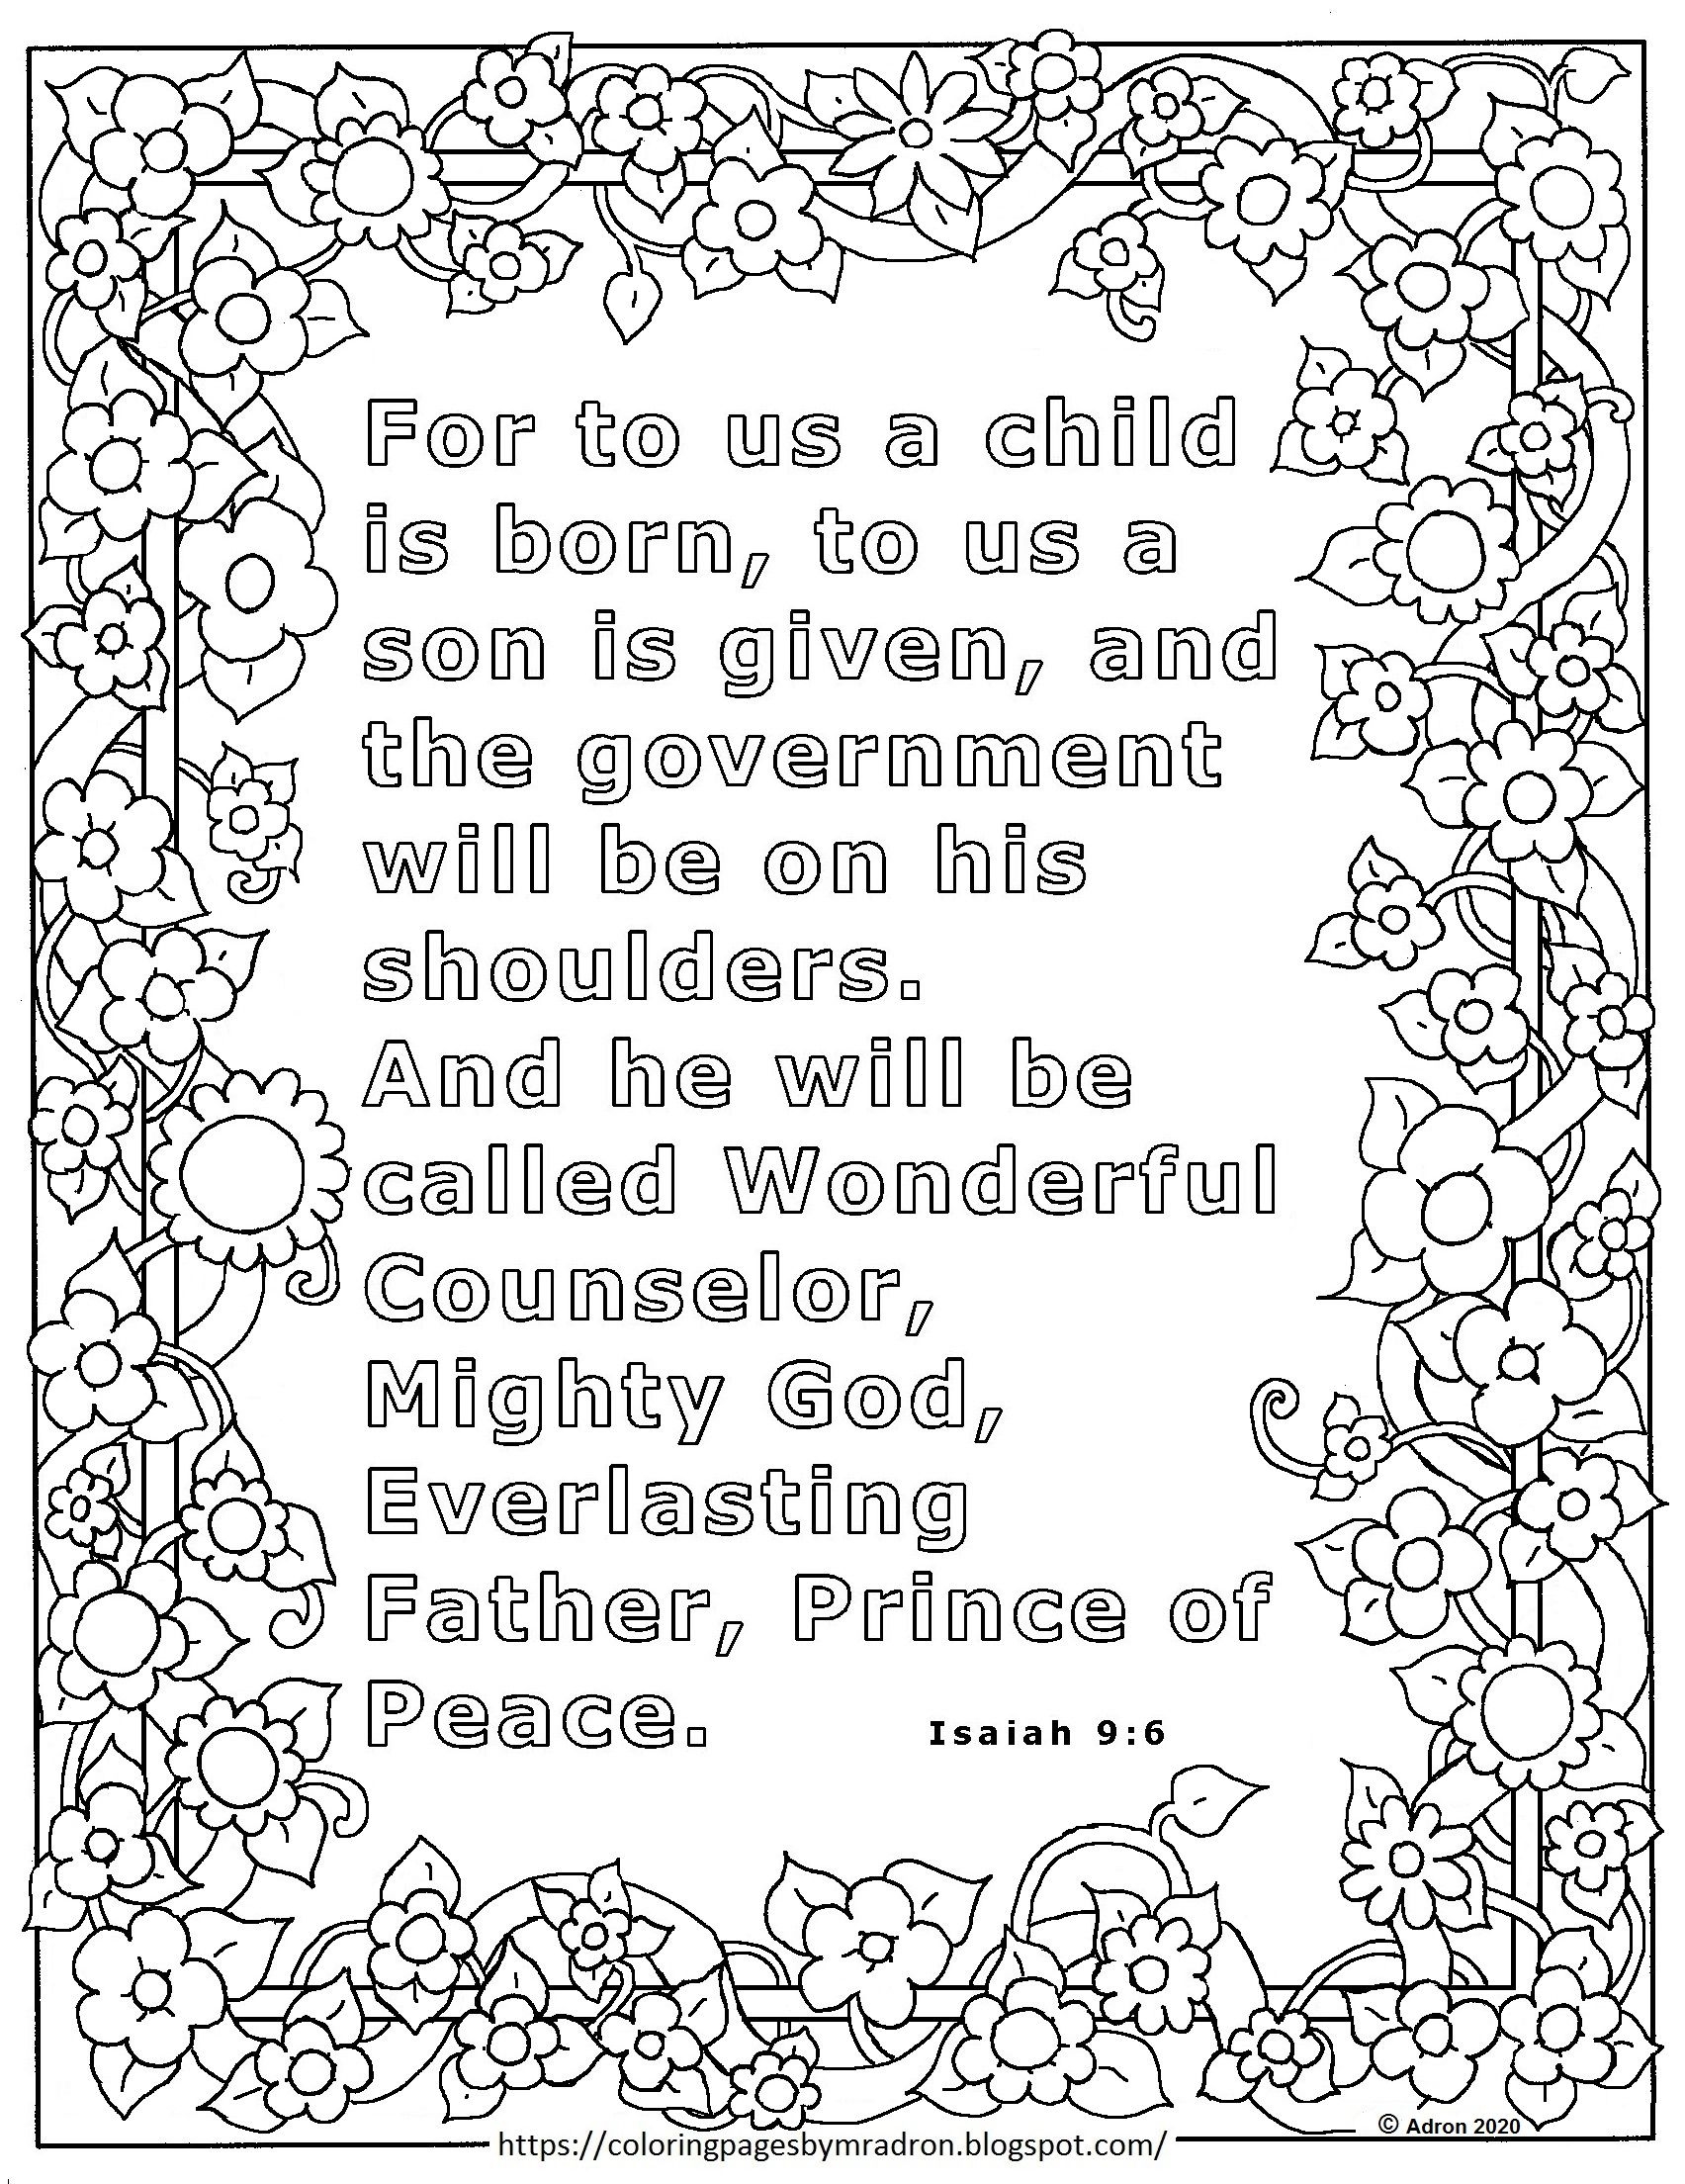 Free Isaiah 9 6 Print And Color Page For Advent Isaiah 9 Bible Verse Coloring Page Isaiah 9 6